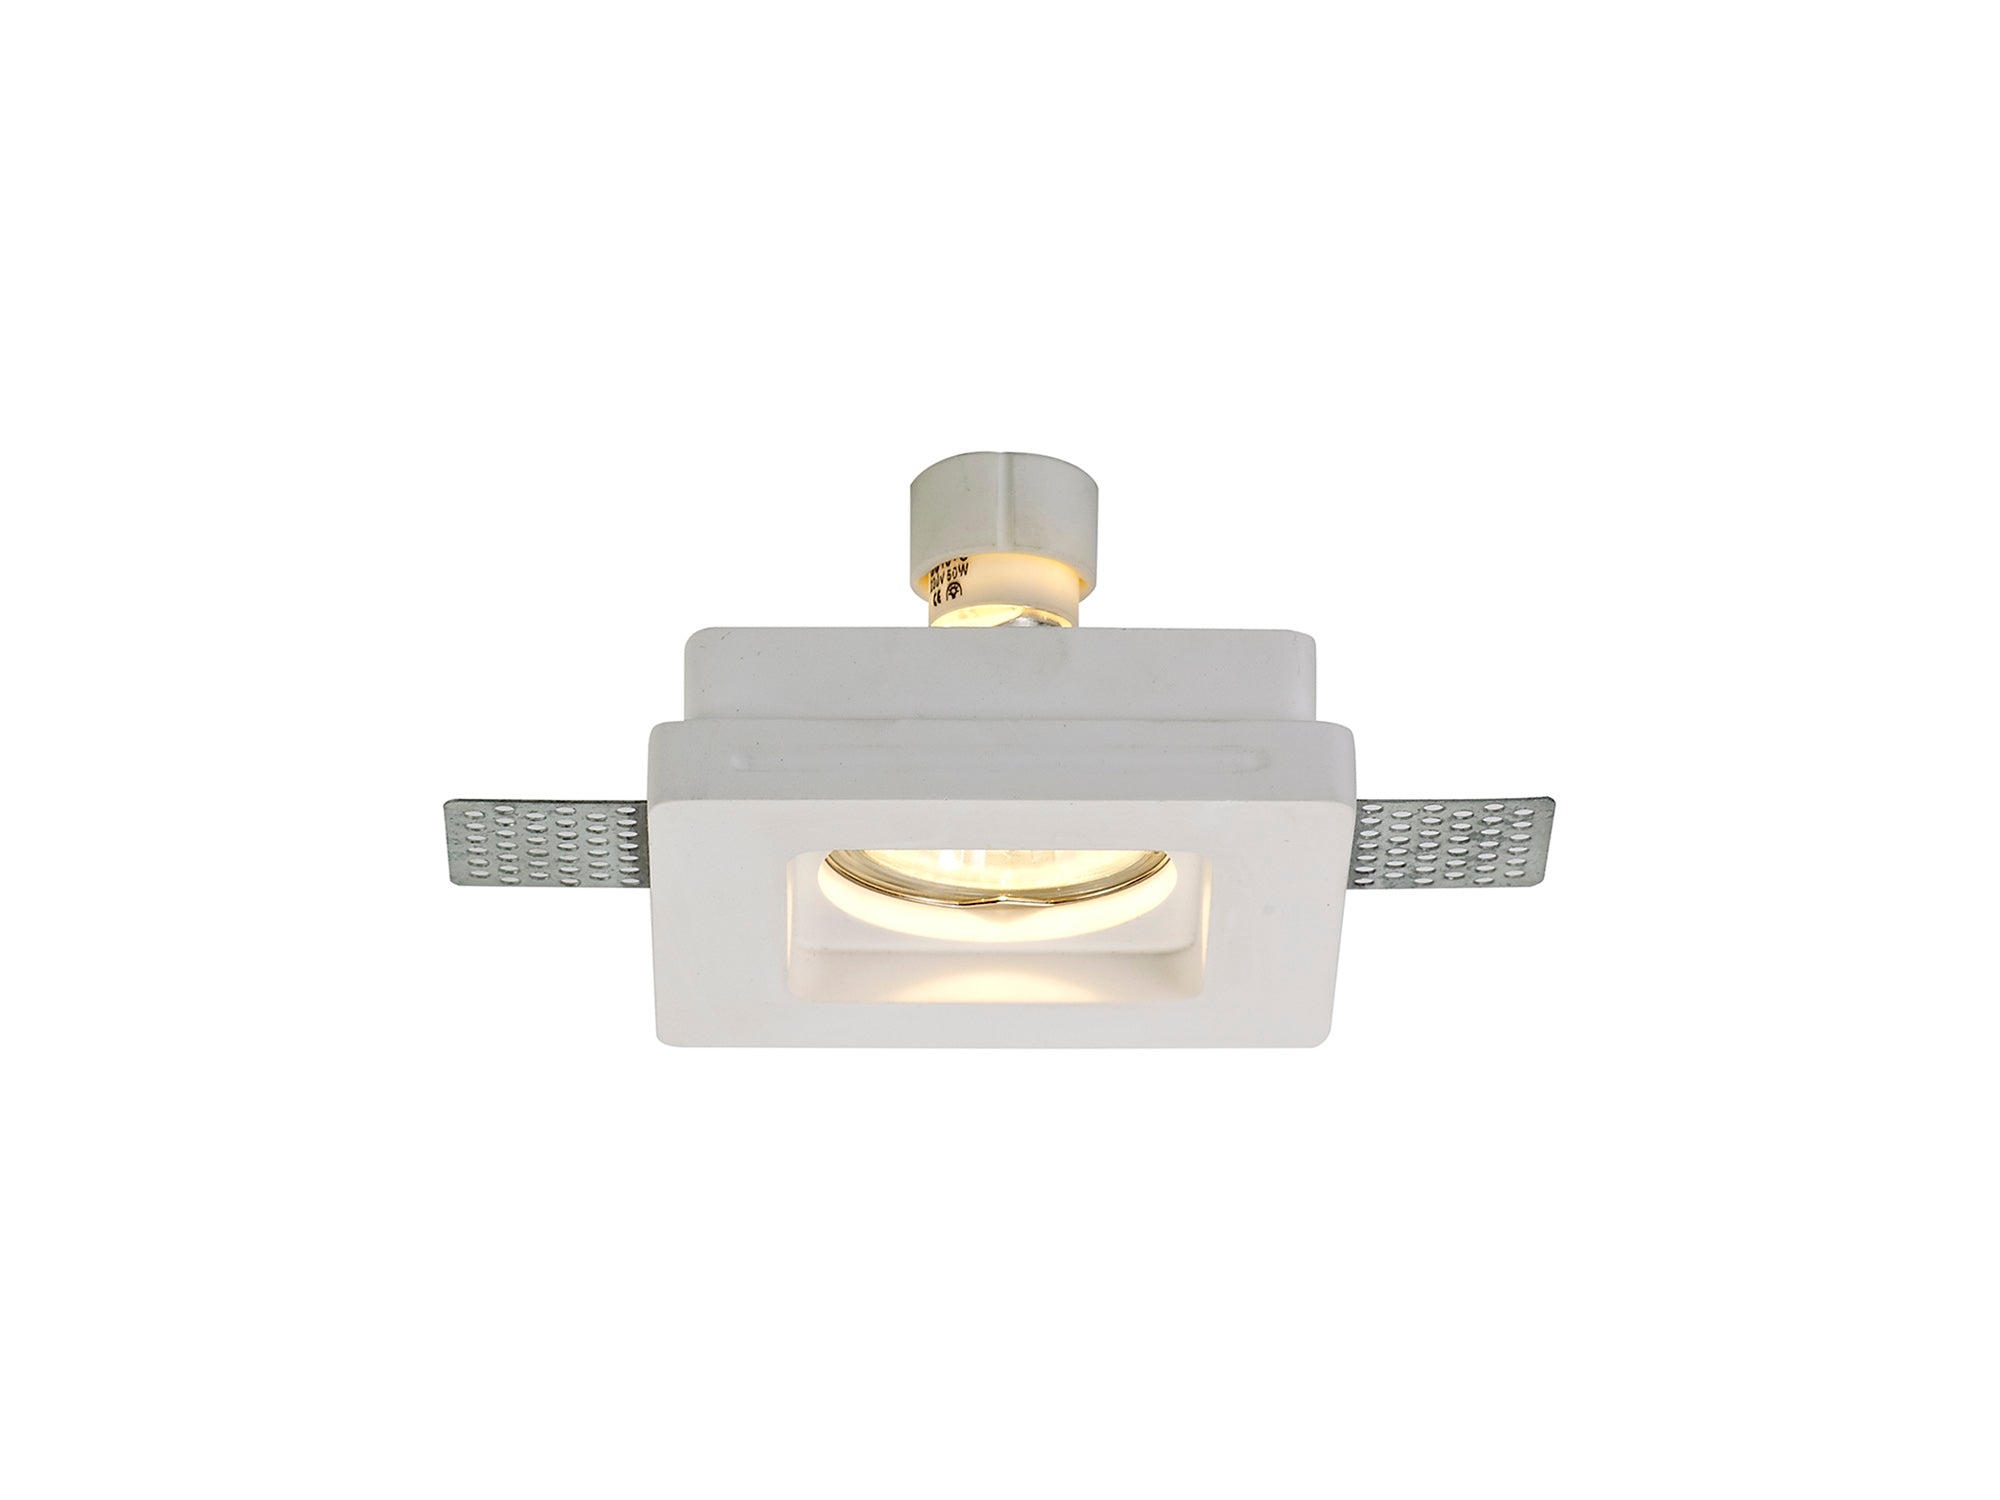 Plastin Square Stepped Recessed Spotlight, GU10, White Paintable Gypsum, Cut Out: L:103mmxW:103mm